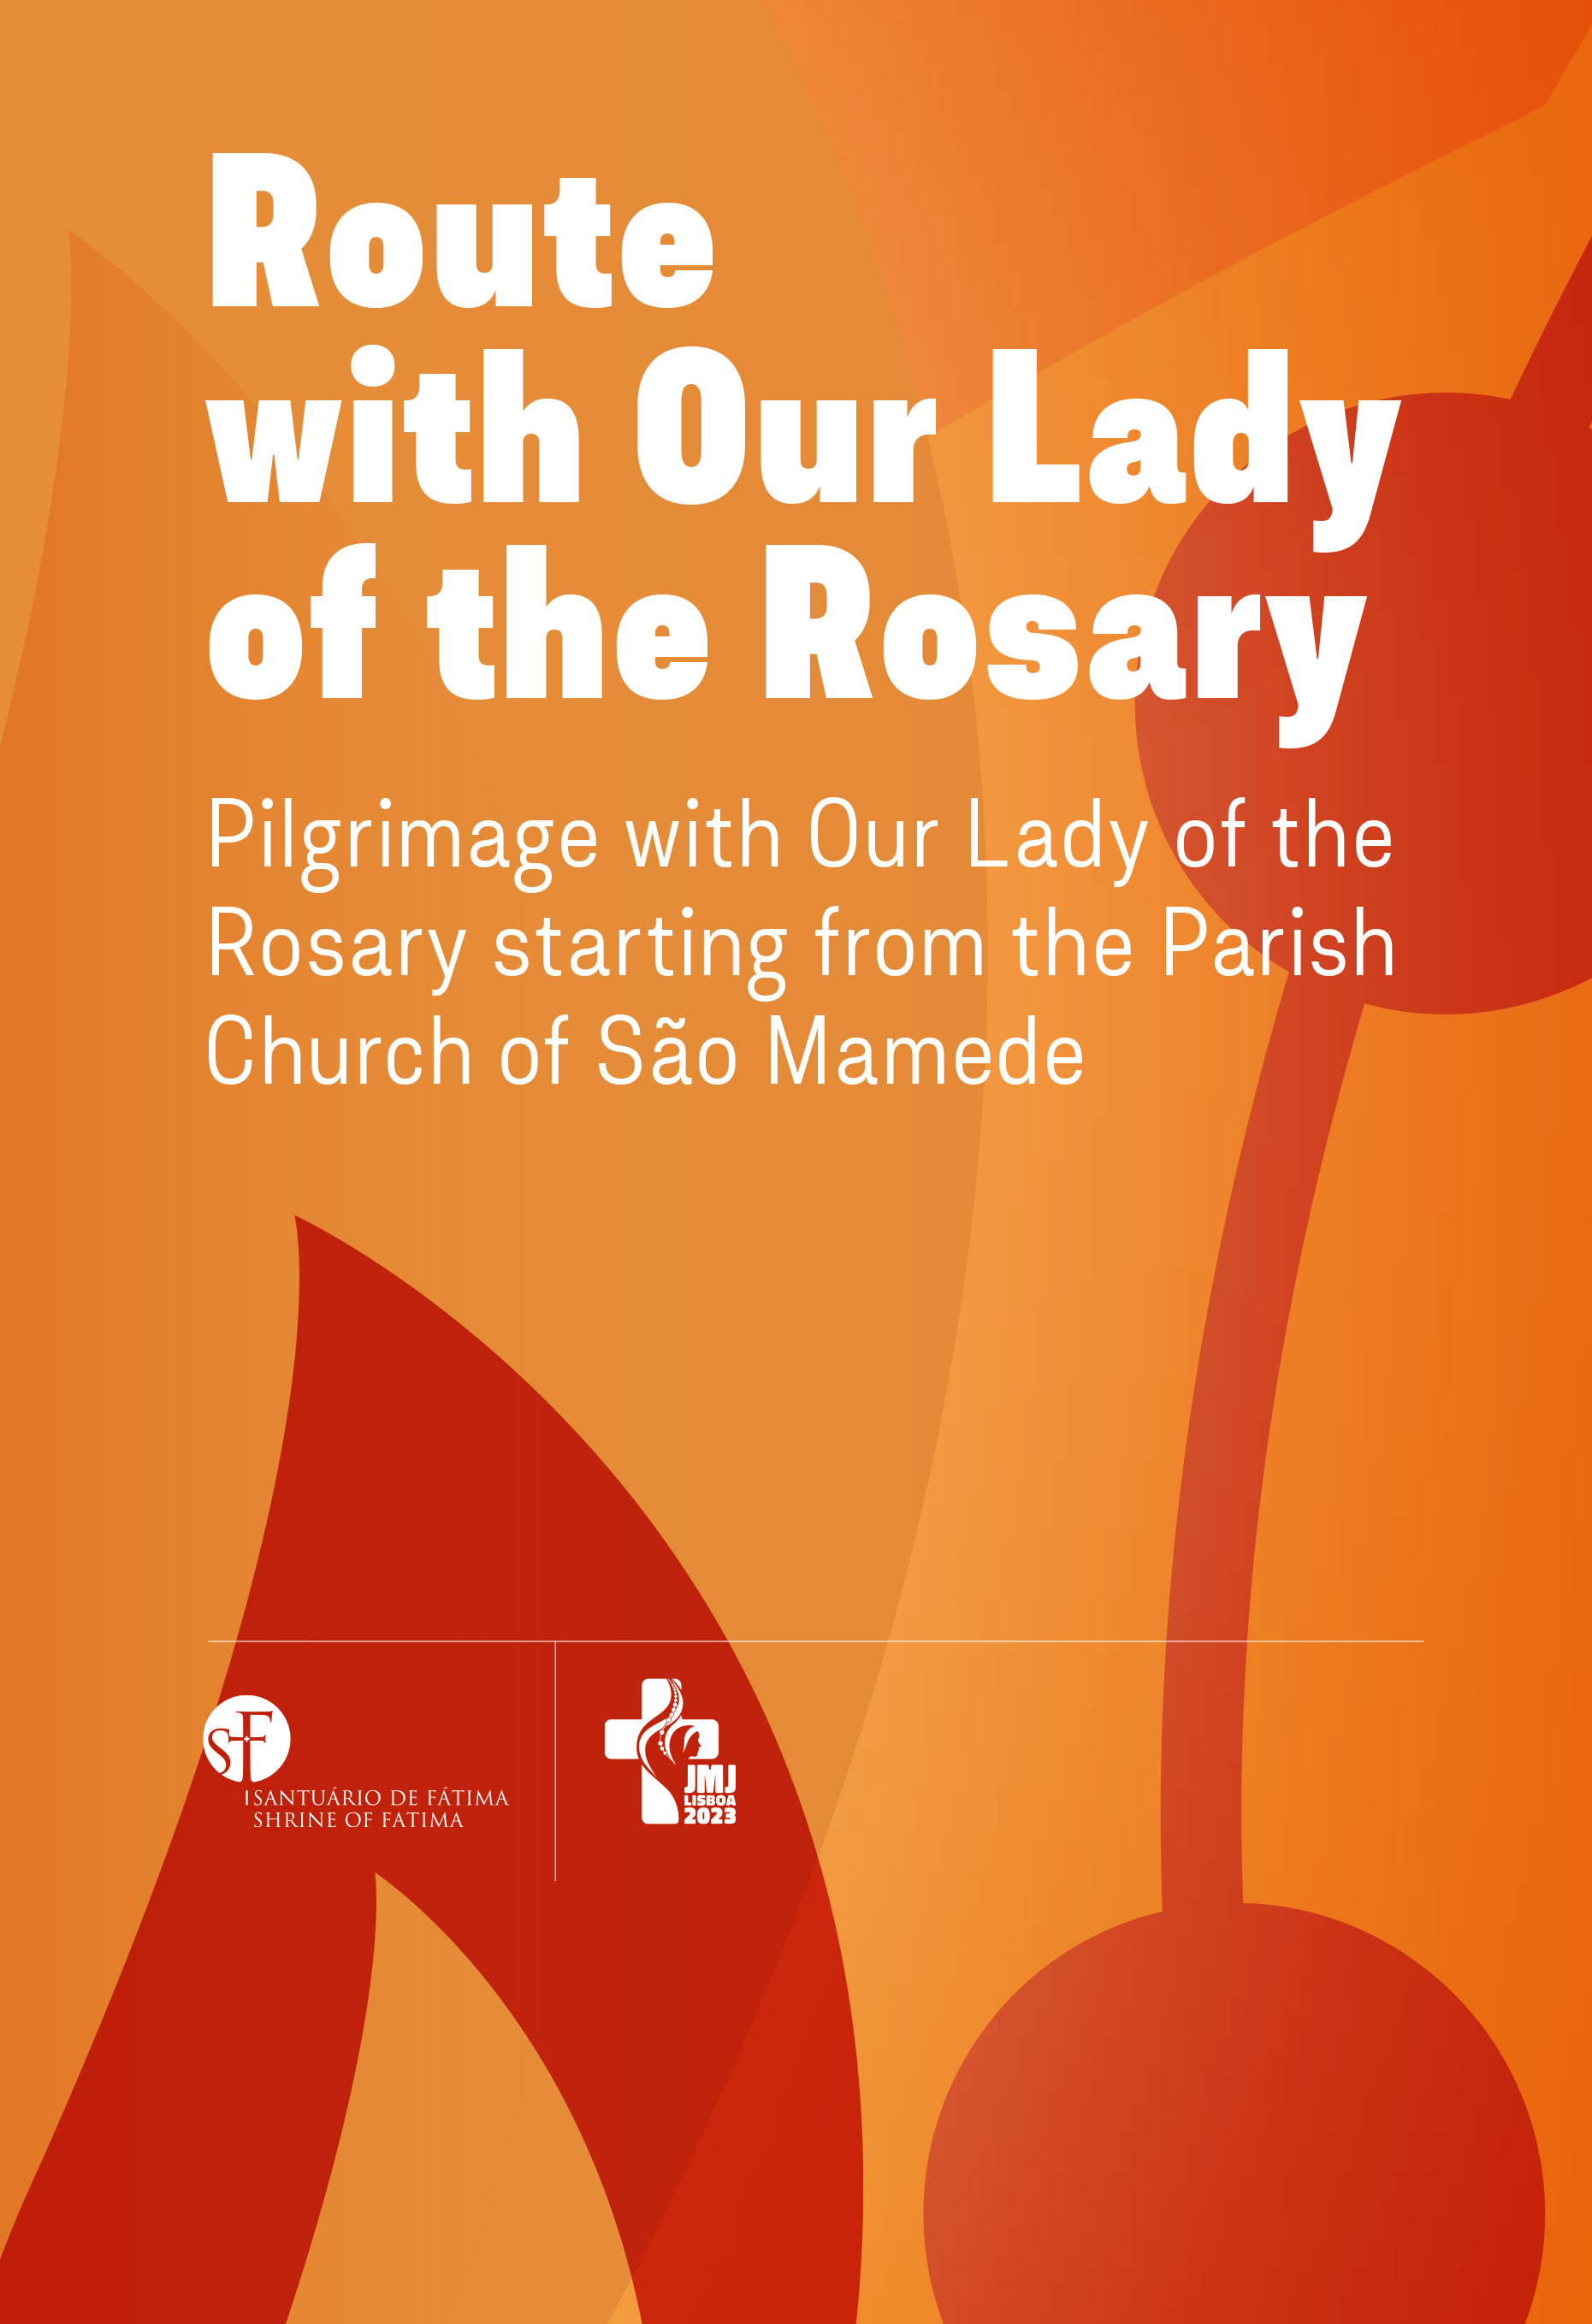 3-route-with-our-lady-of-the-rosary-1.jpg